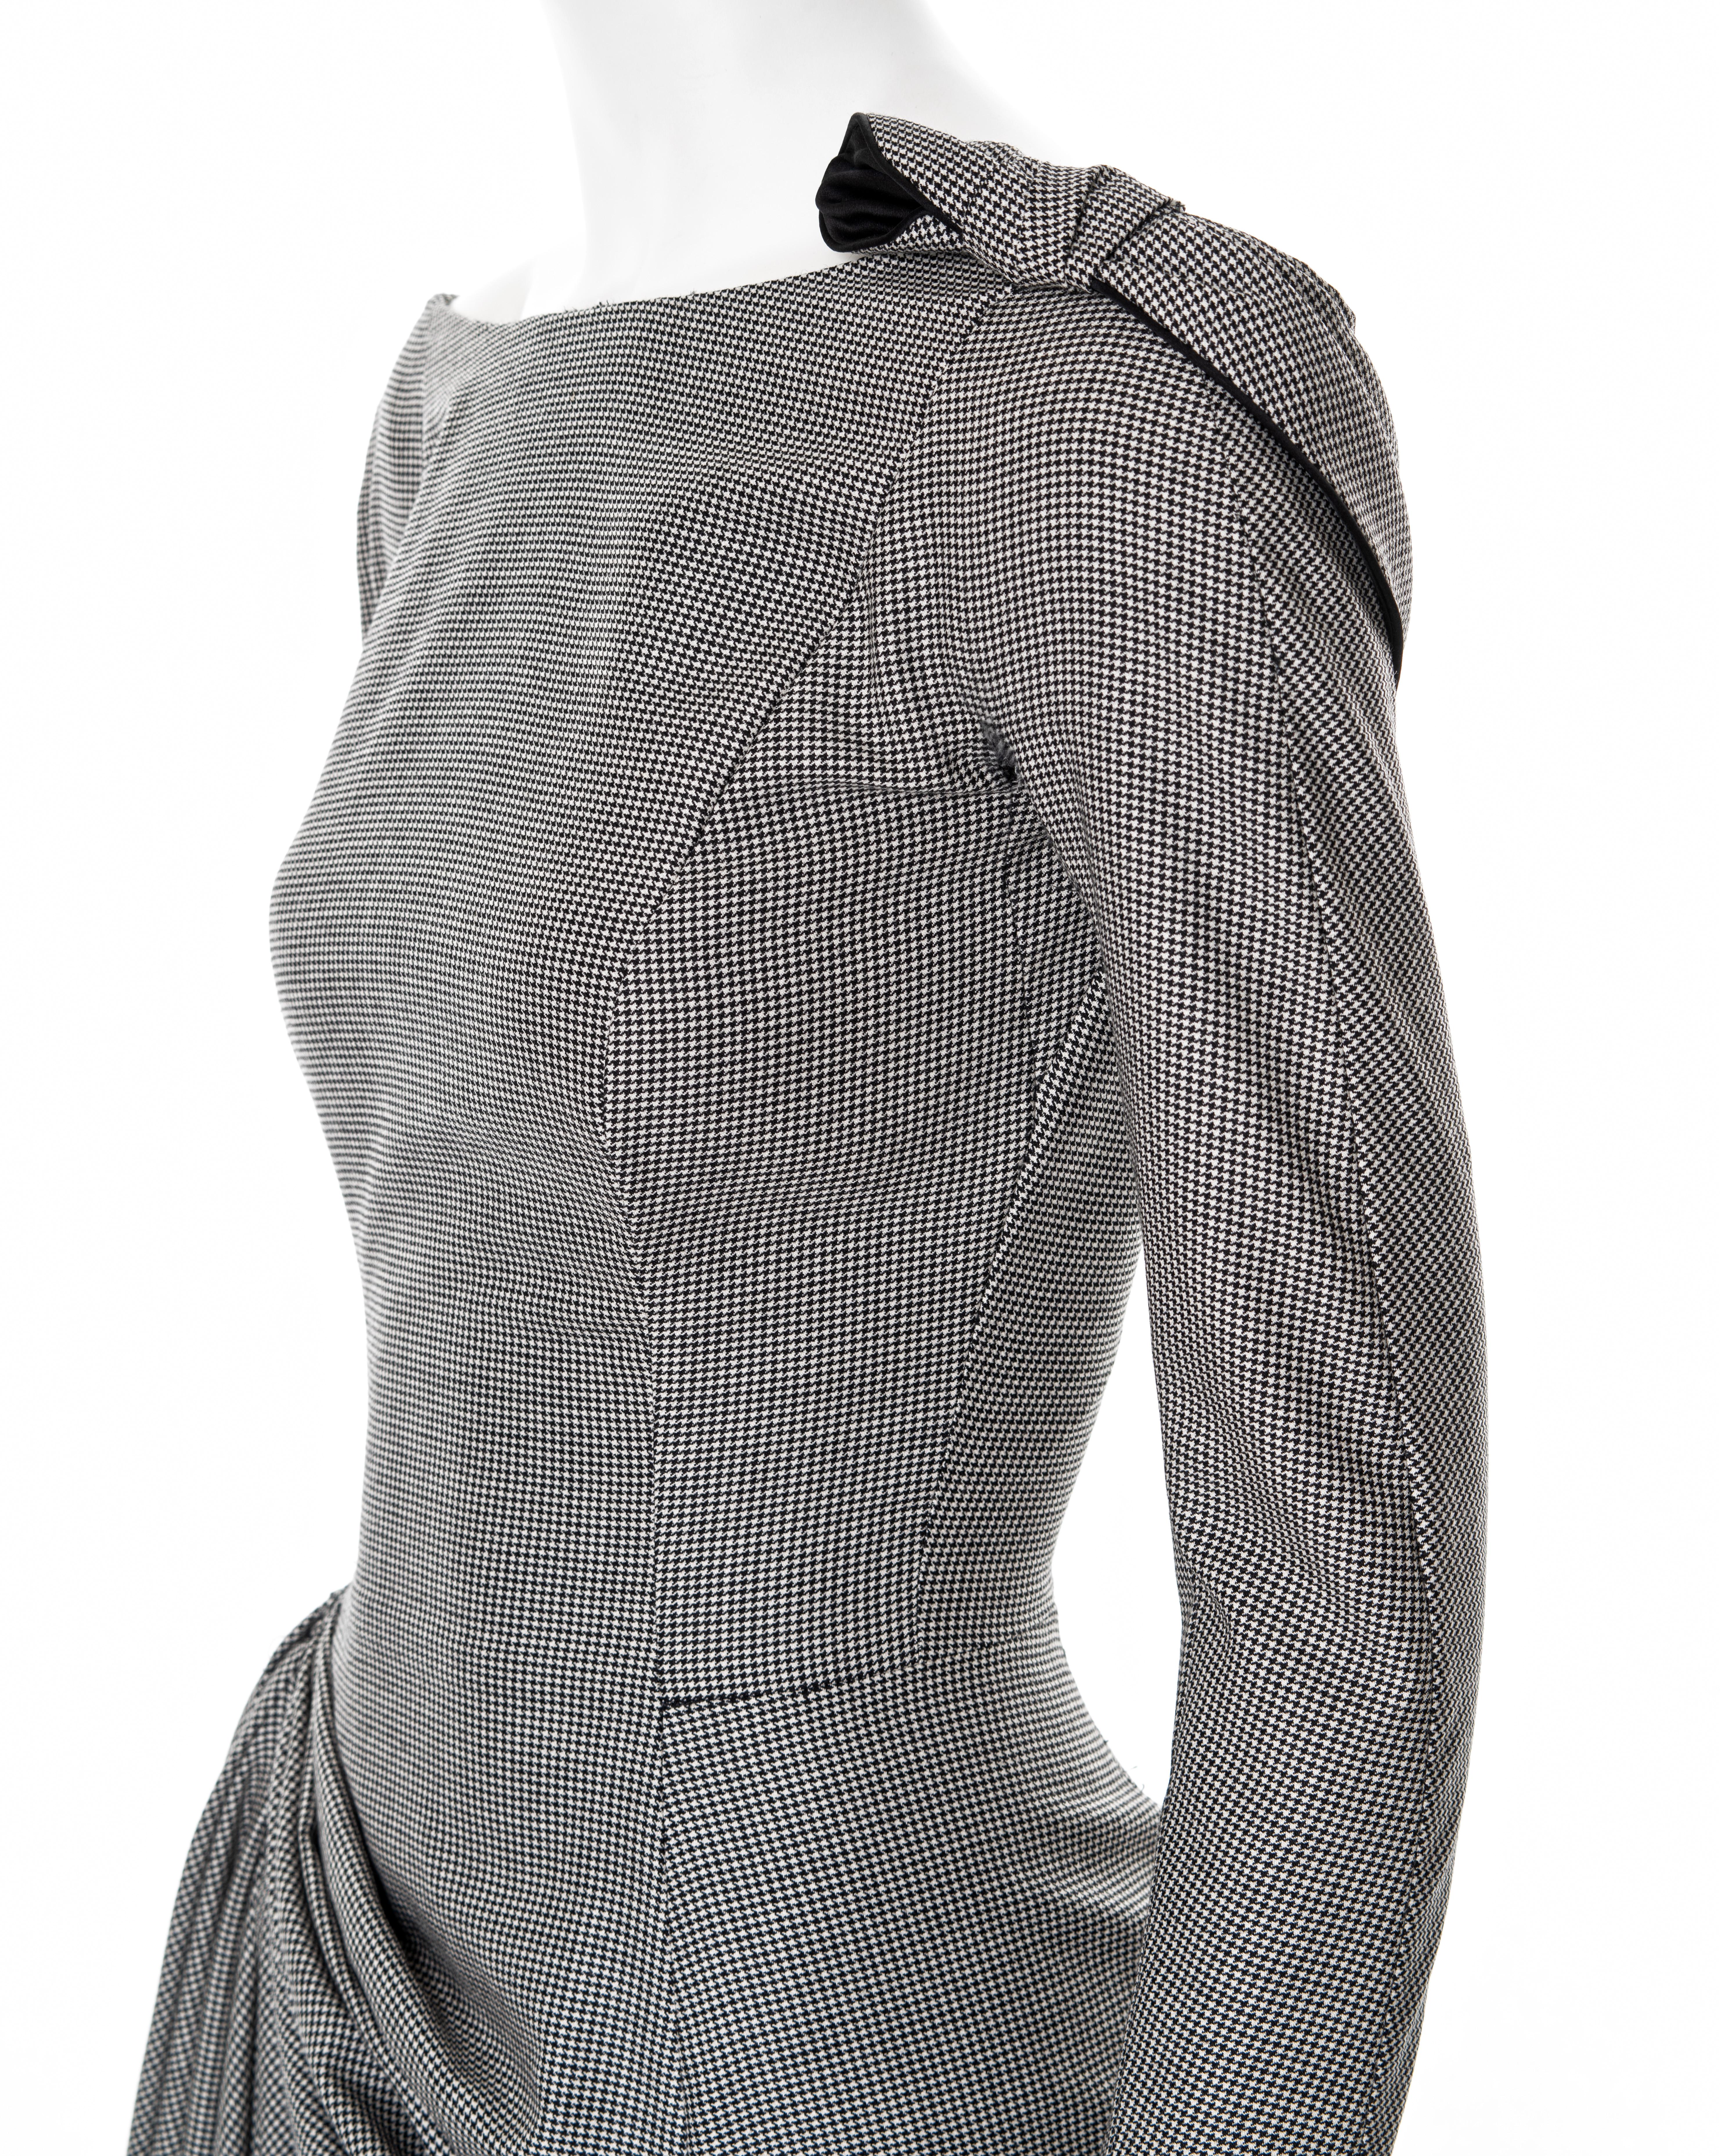 John Galliano draped houndstooth check wool cocktail dress, ss 1995 5